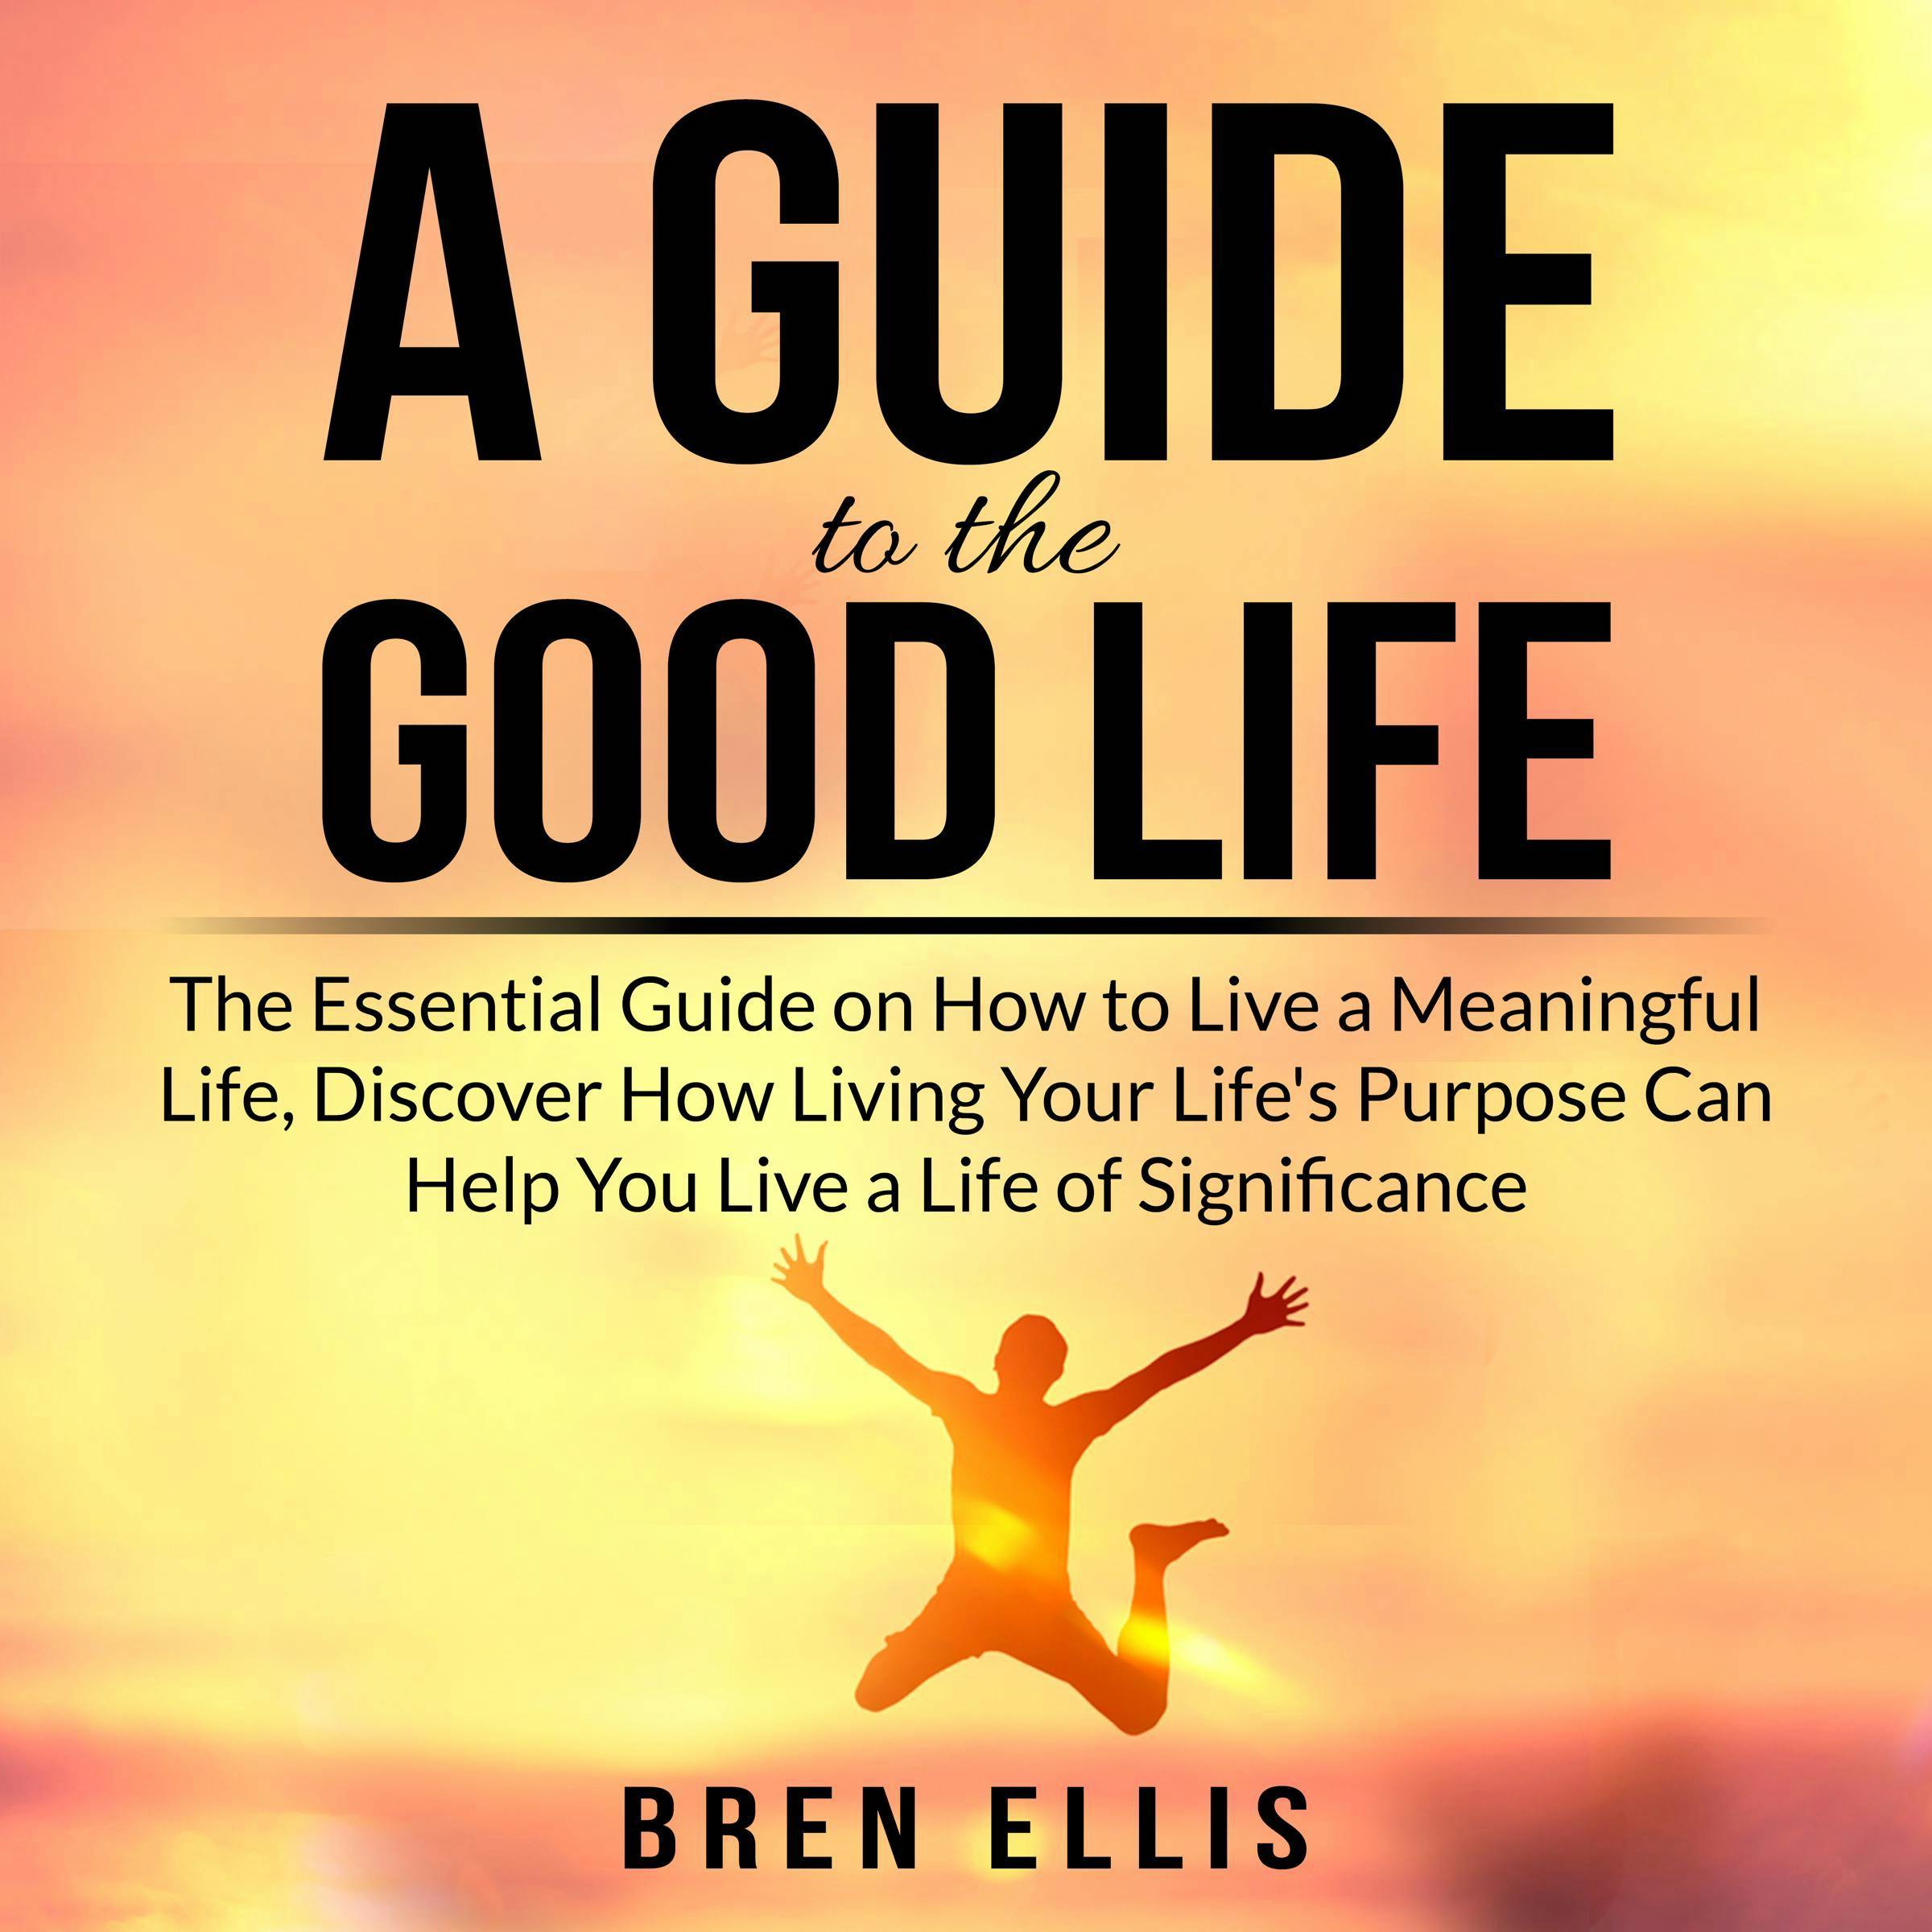 A Guide to the Good Life: The Essential Guide on How to Live a Meaningful Life, Discover How Living Your Life's Purpose Can Help You Live a Life of Significance - undefined